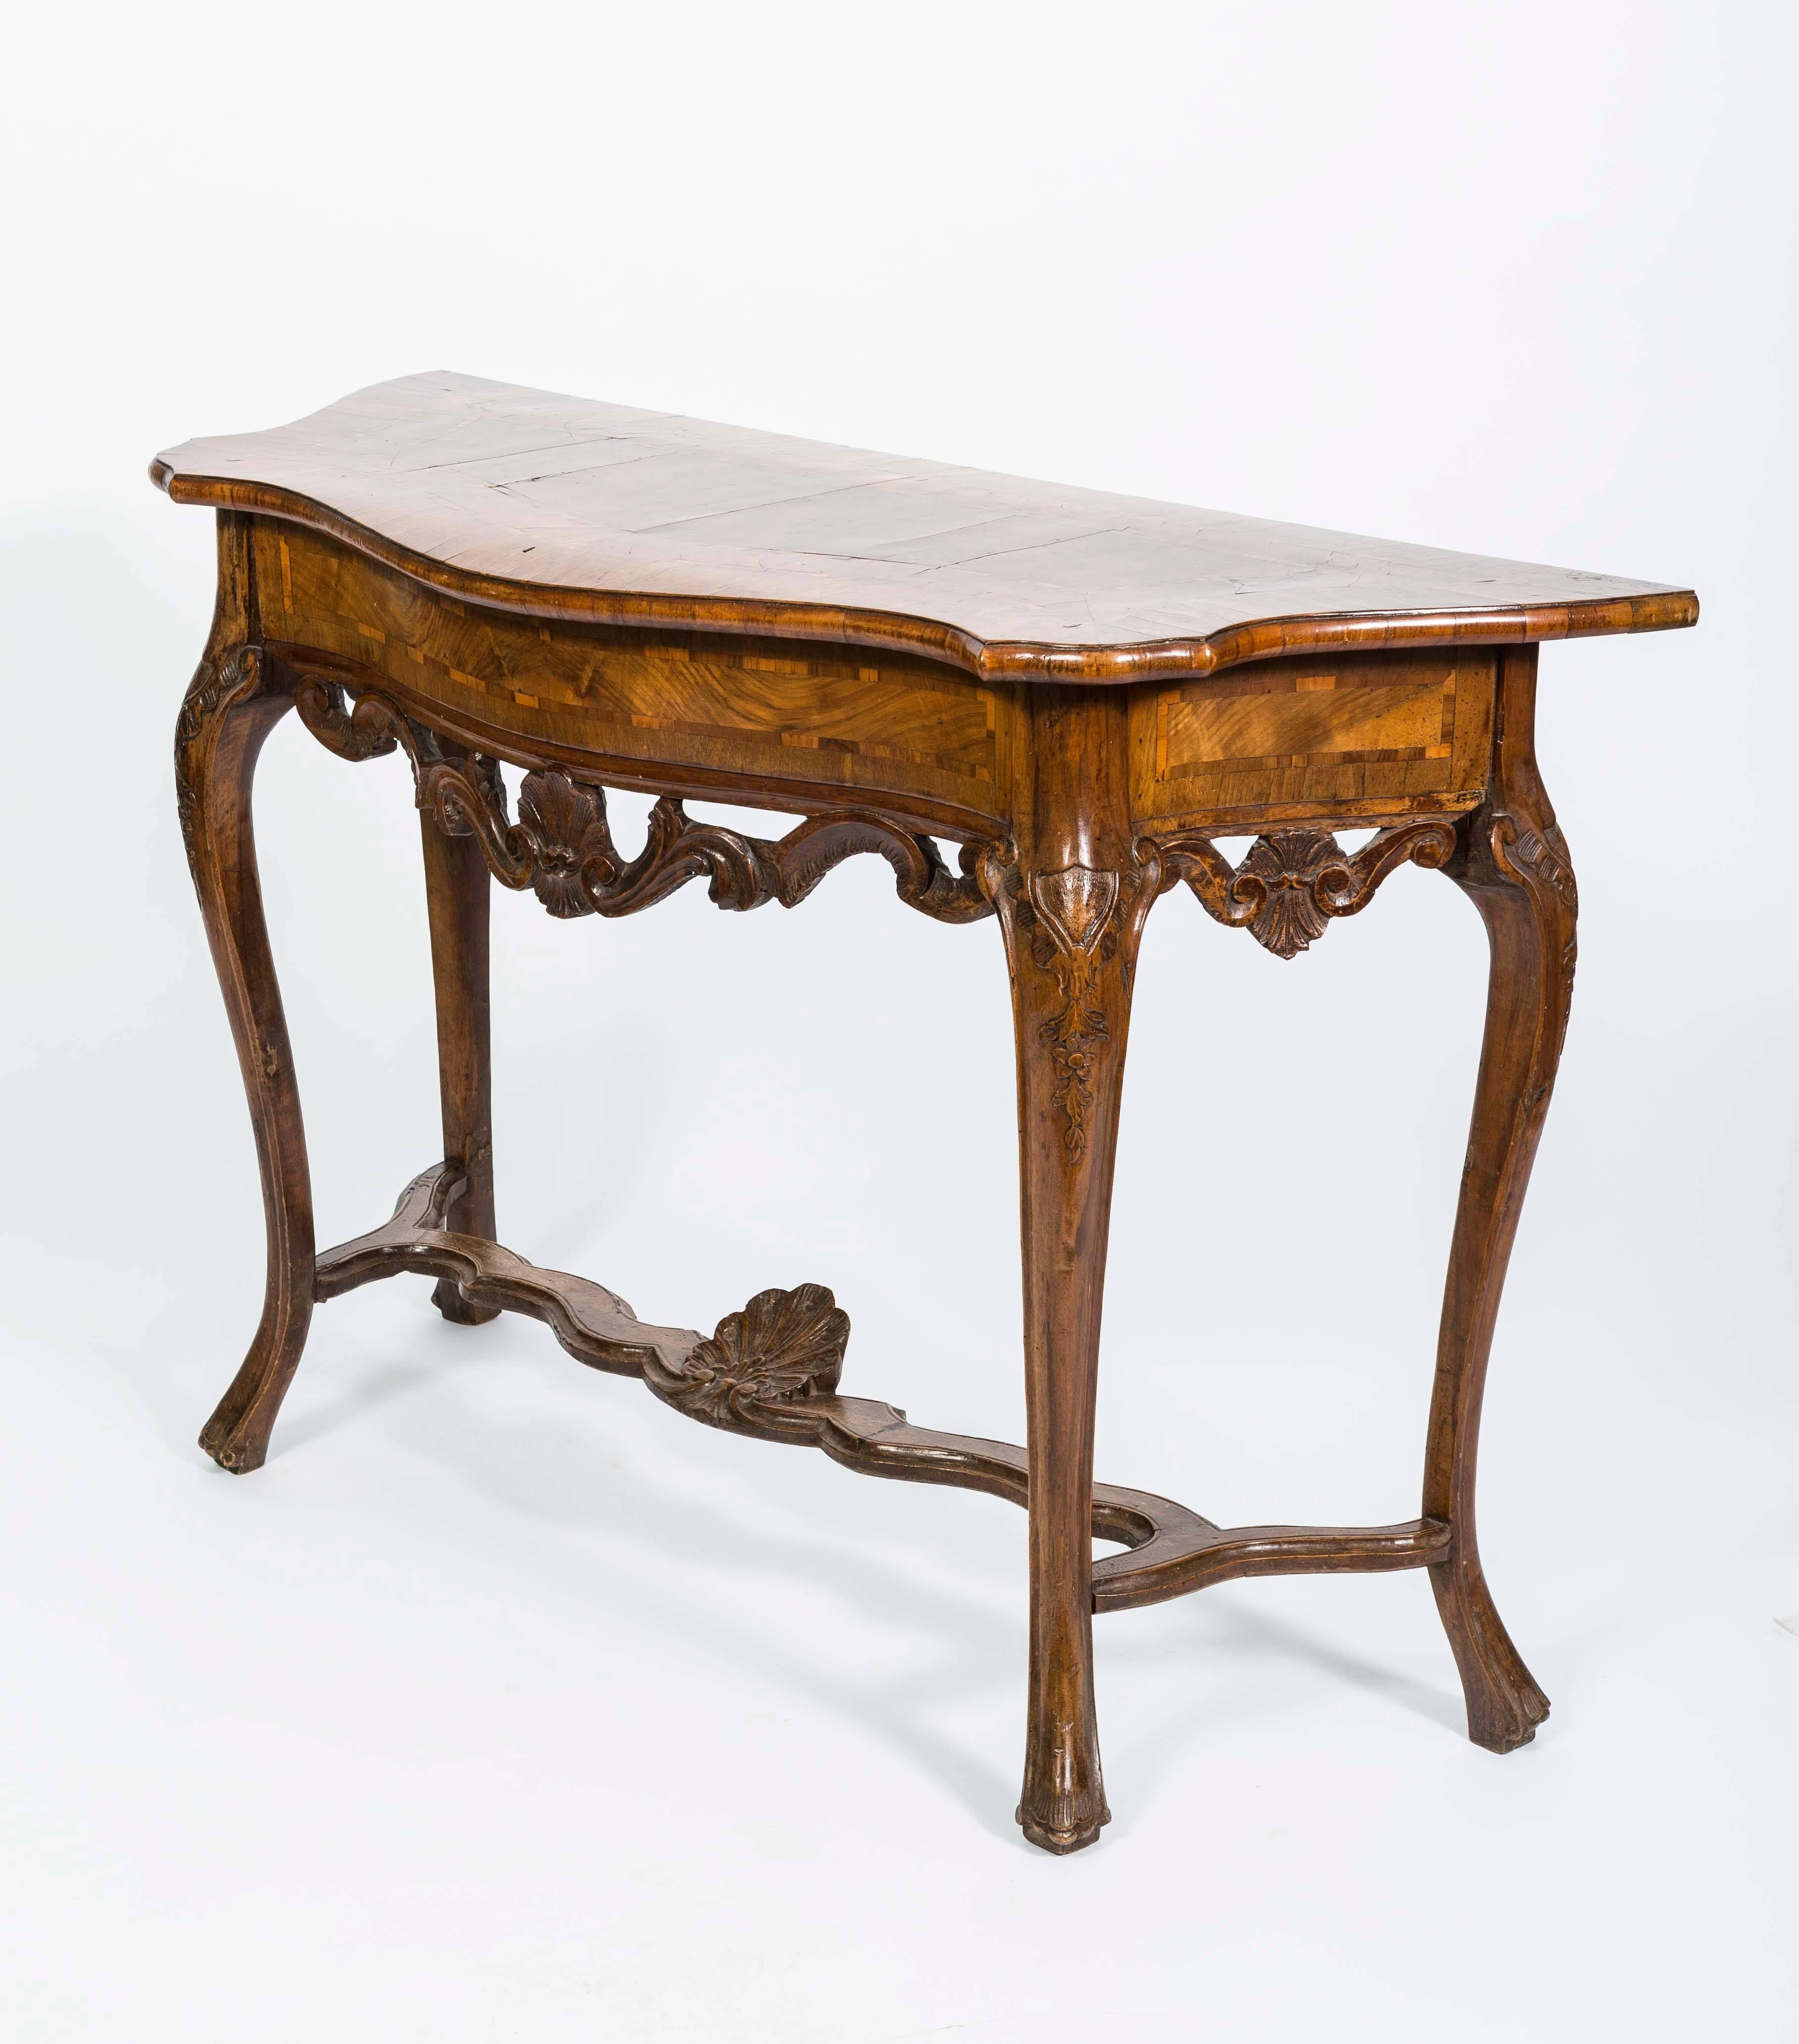 18th century Italian console table in walnut wood. The Italian console has four curved legs connected by a stretcher with a shell motif in the centre of the stretcher. The 18th century console table has a beautiful shaped top with a scroll design on